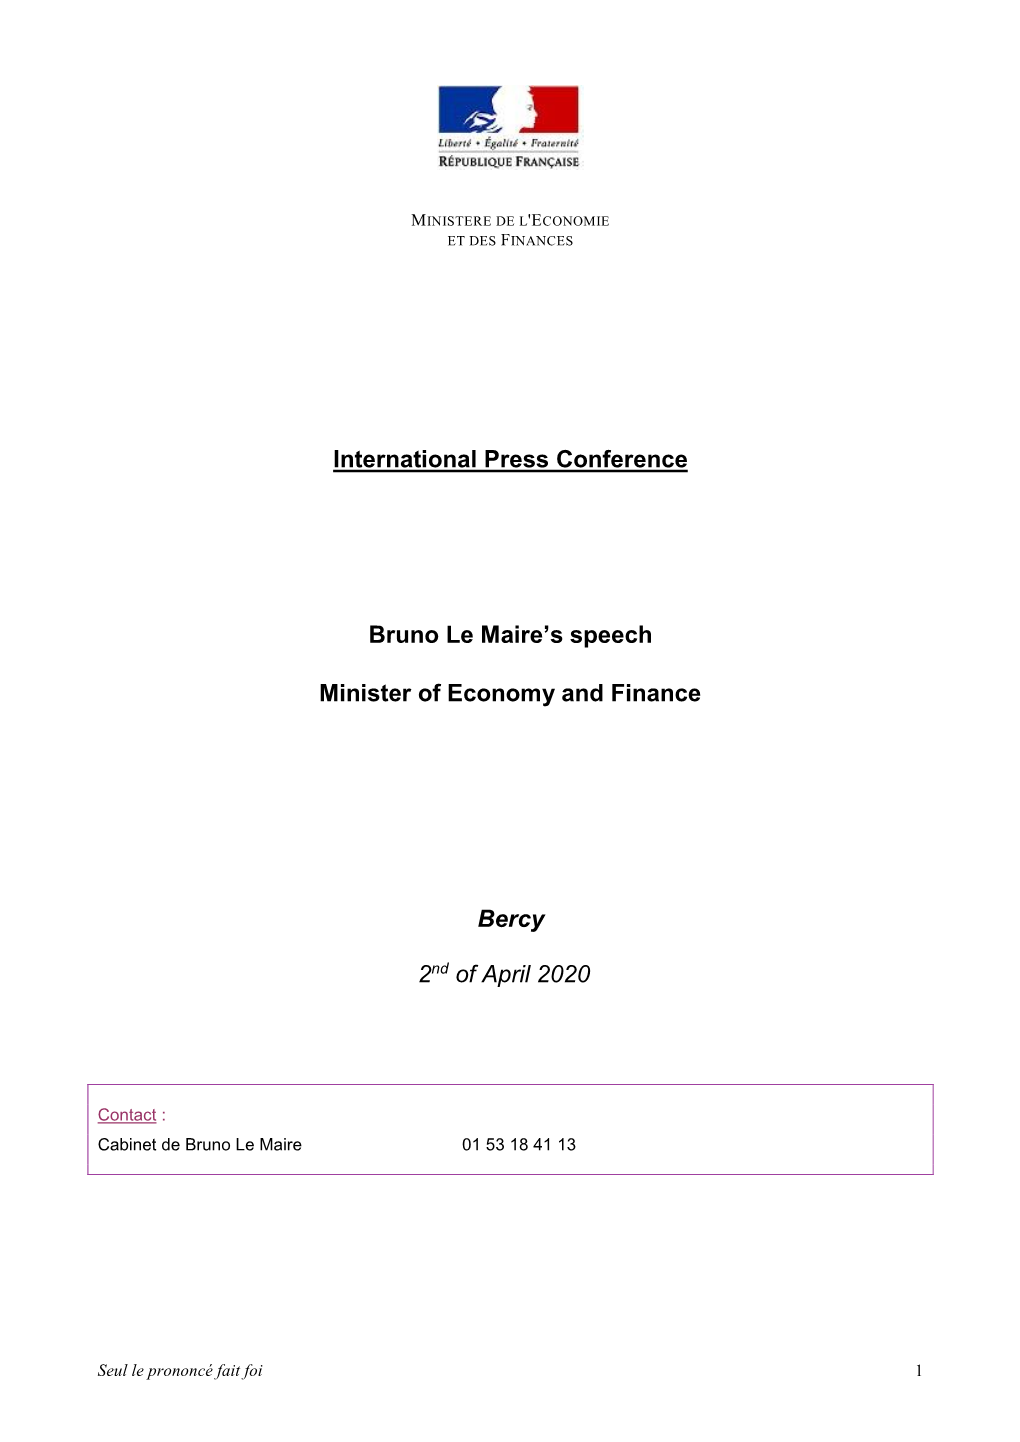 International Press Conference Bruno Le Maire's Speech Minister of Economy and Finance Bercy 2Nd of April 2020